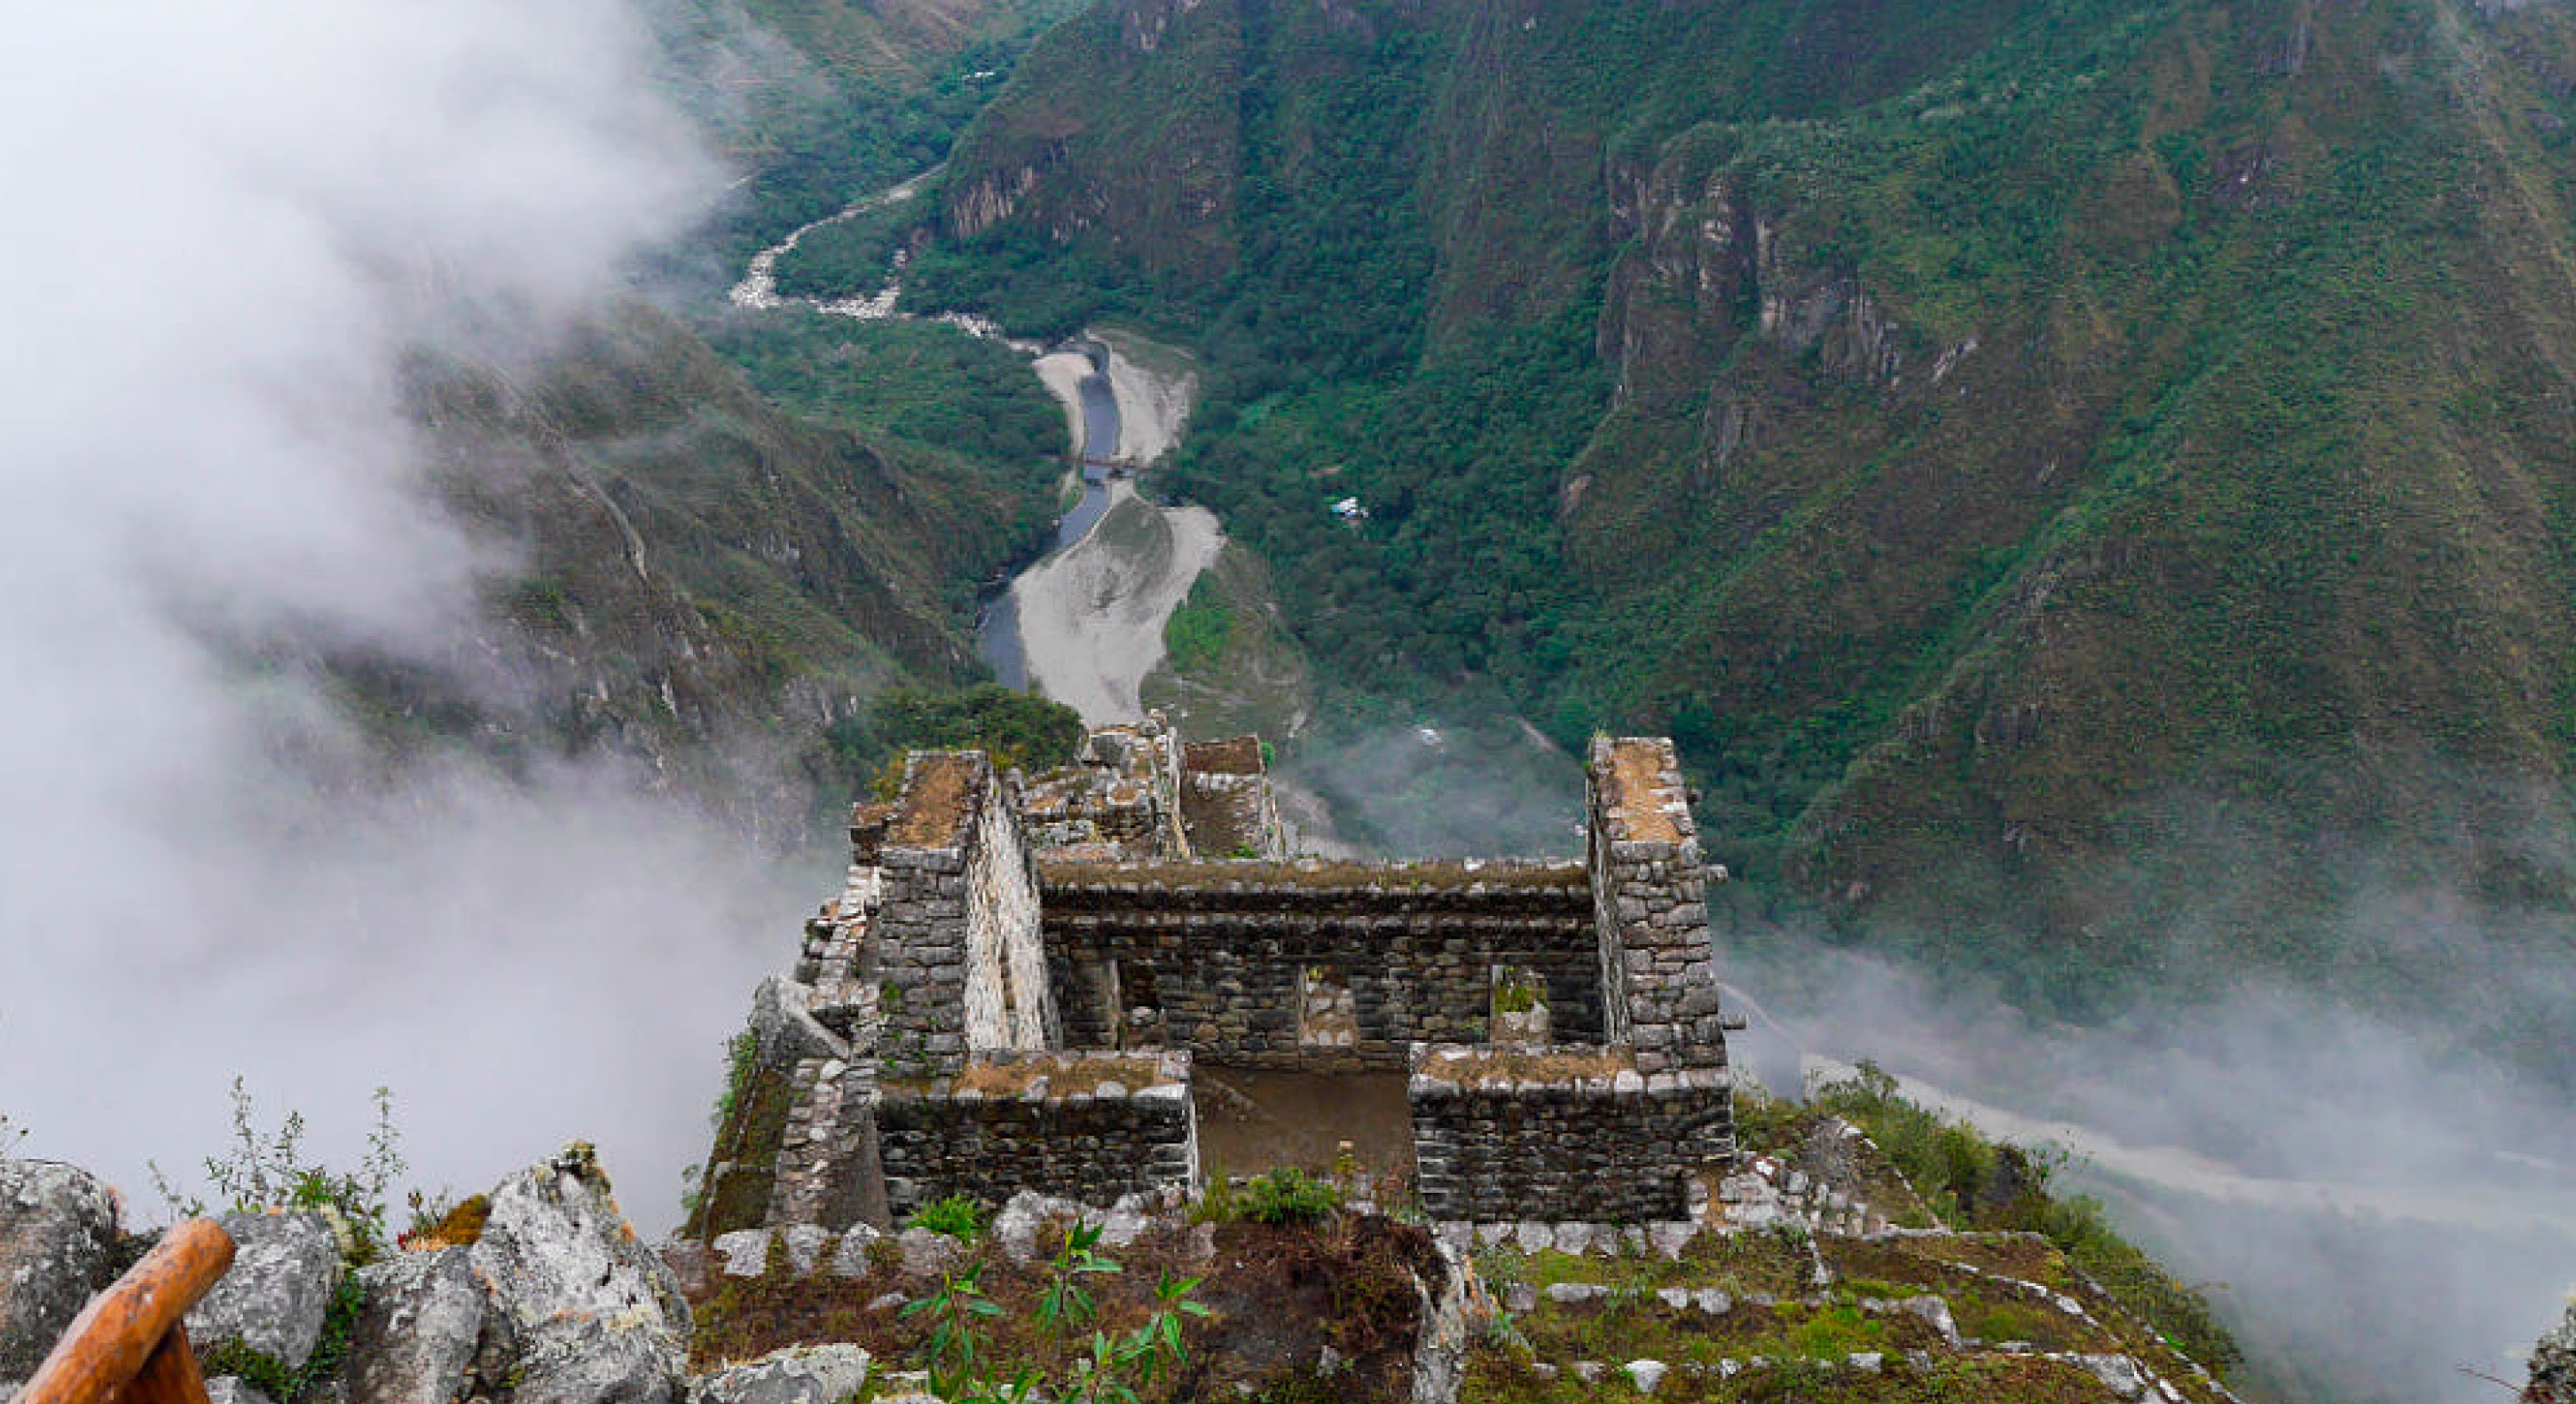 Some of the many reasons to go up to Huayna Picchu